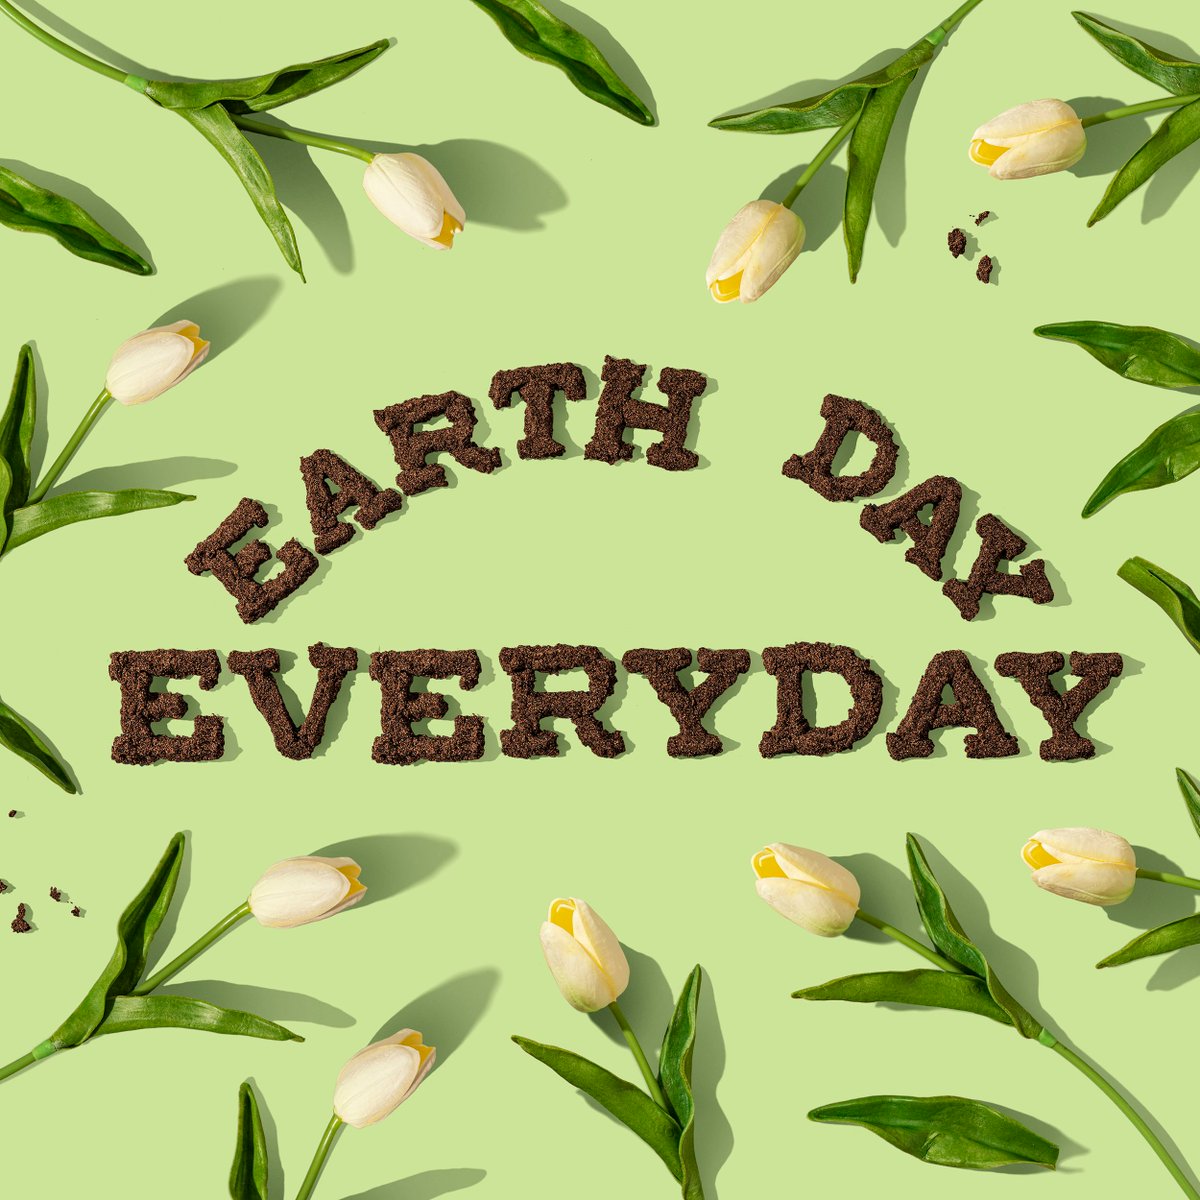 Join us at #Oundle Library on Saturday 20 April for our Earth Day Children's Craft event! To book a place email oundle.libraryplus@northnorthants.gov.uk 🌍 Saturday 20 April 10:30-11:30am 🌎 Suitable for all ages 🌏 FREE! #EarthDay #EarthDayeveryday